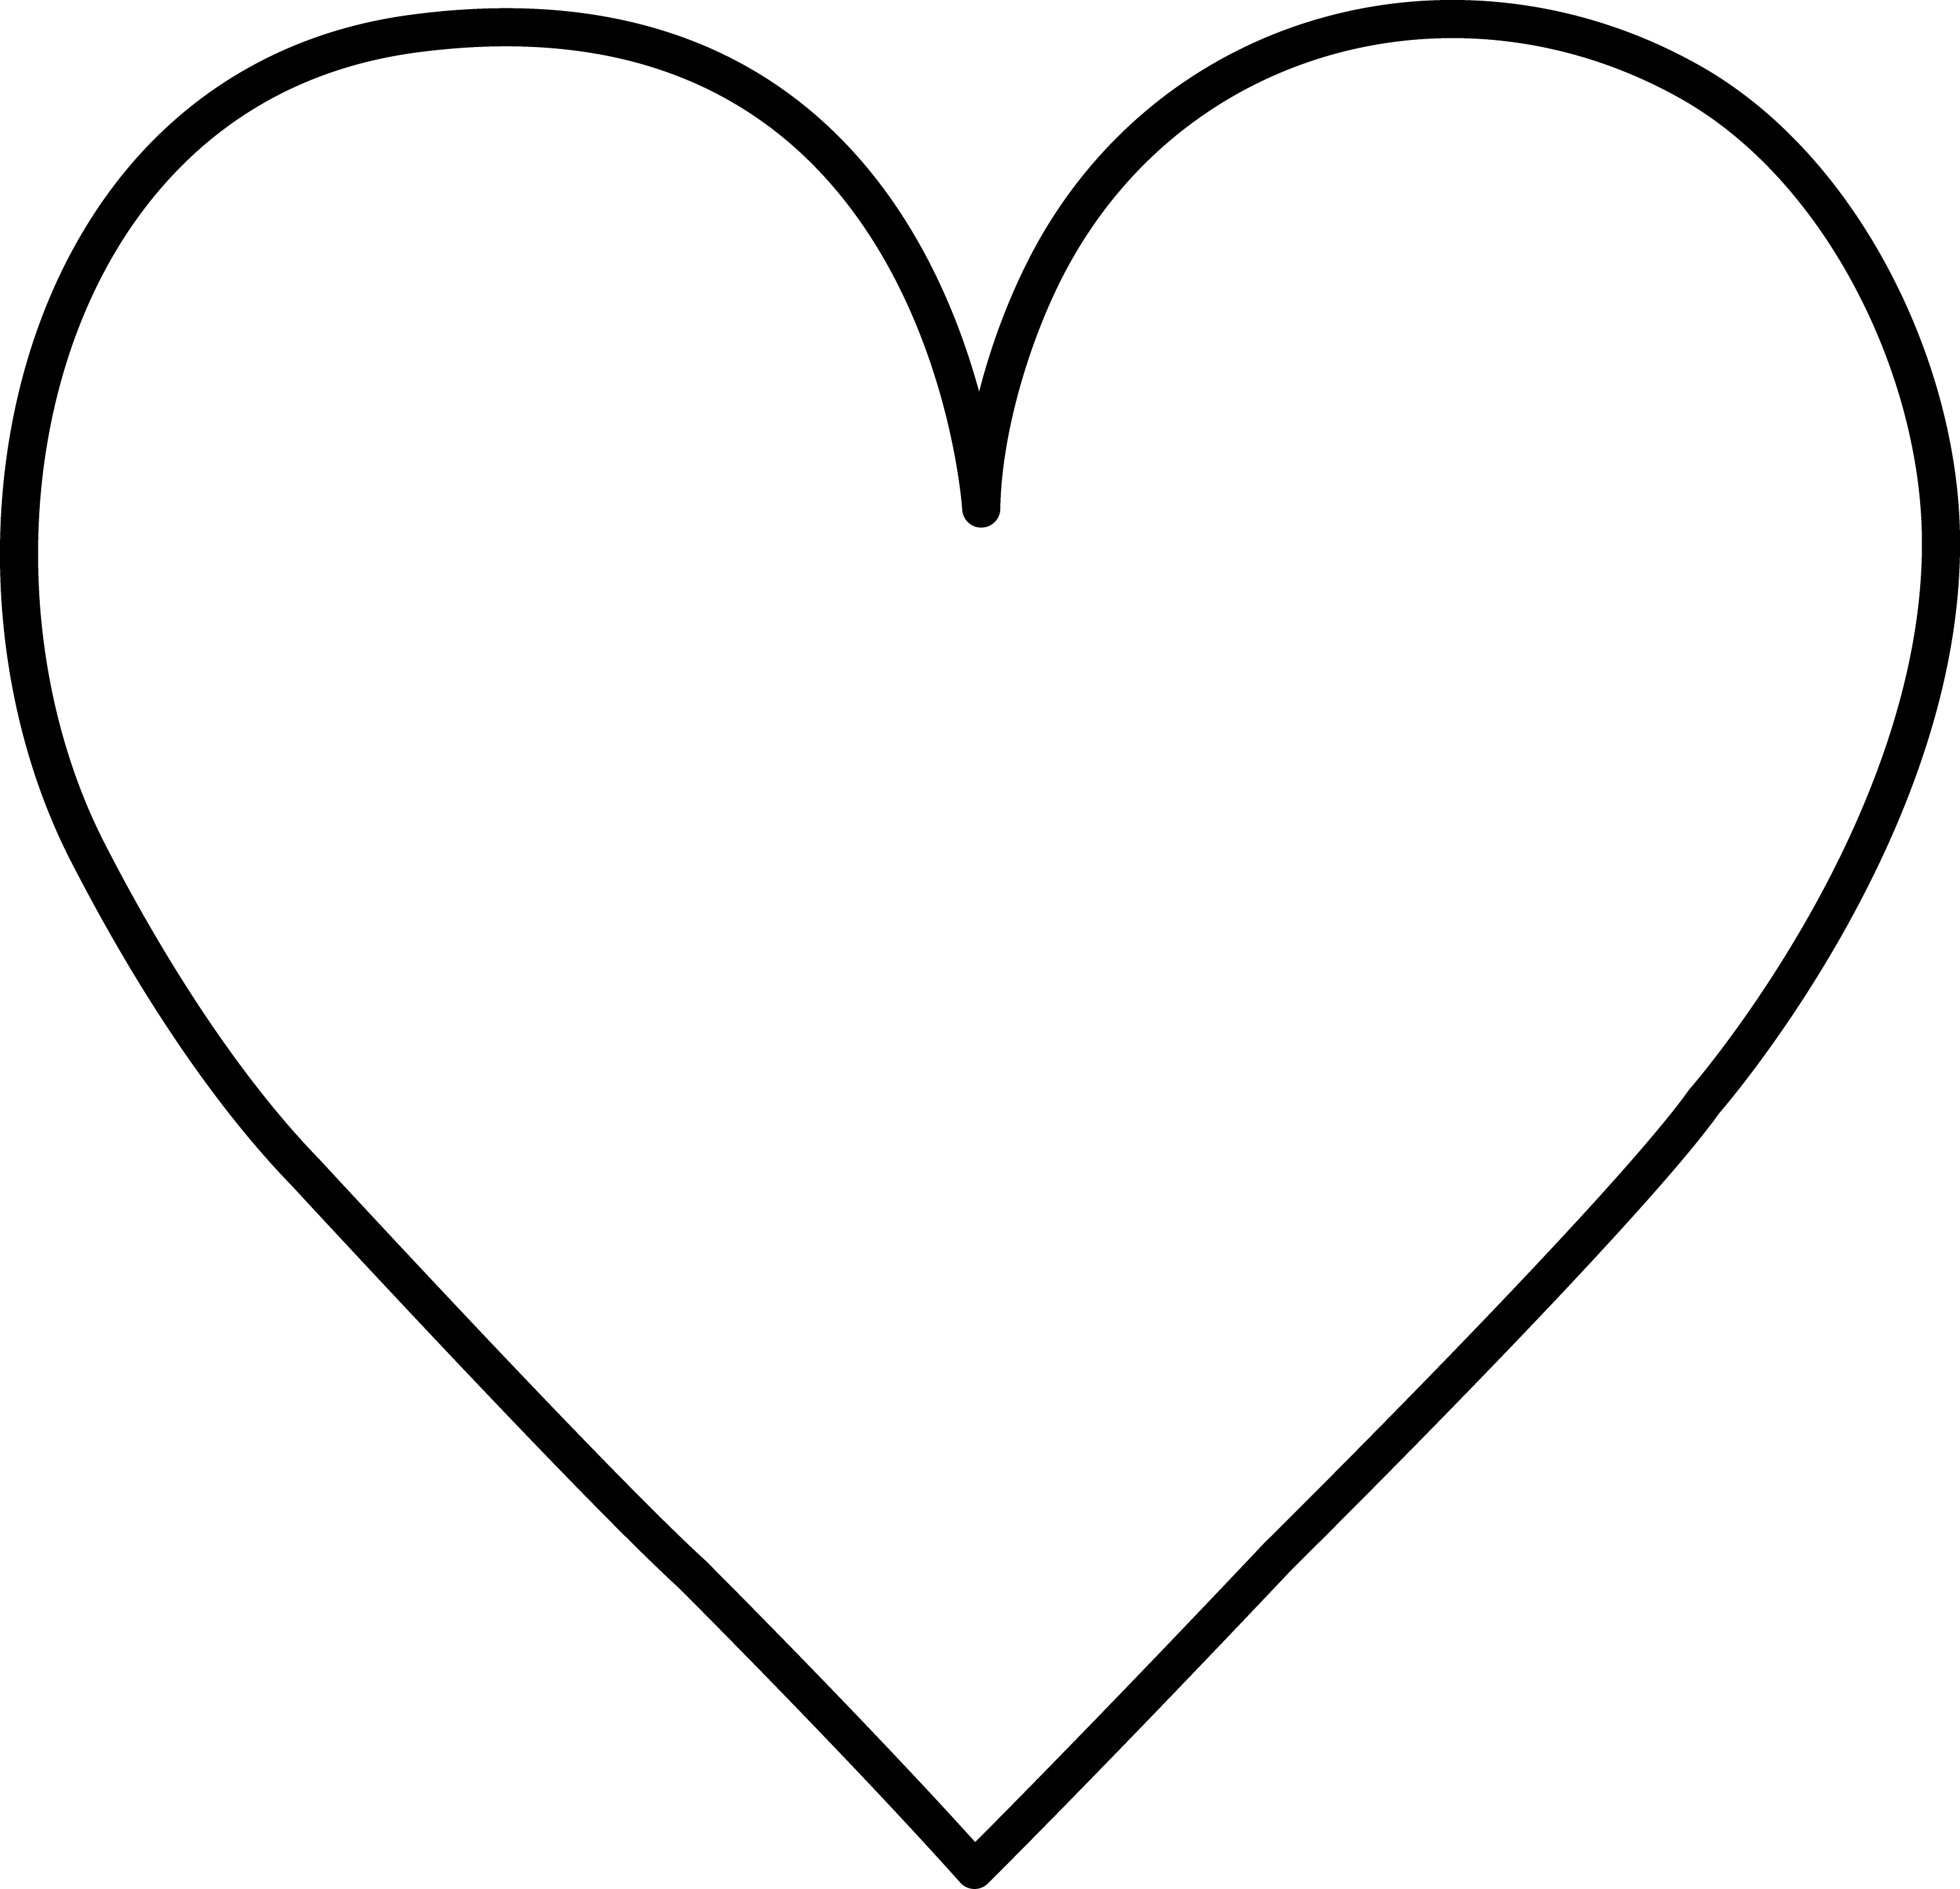 Black and White Heart Free Clip Art